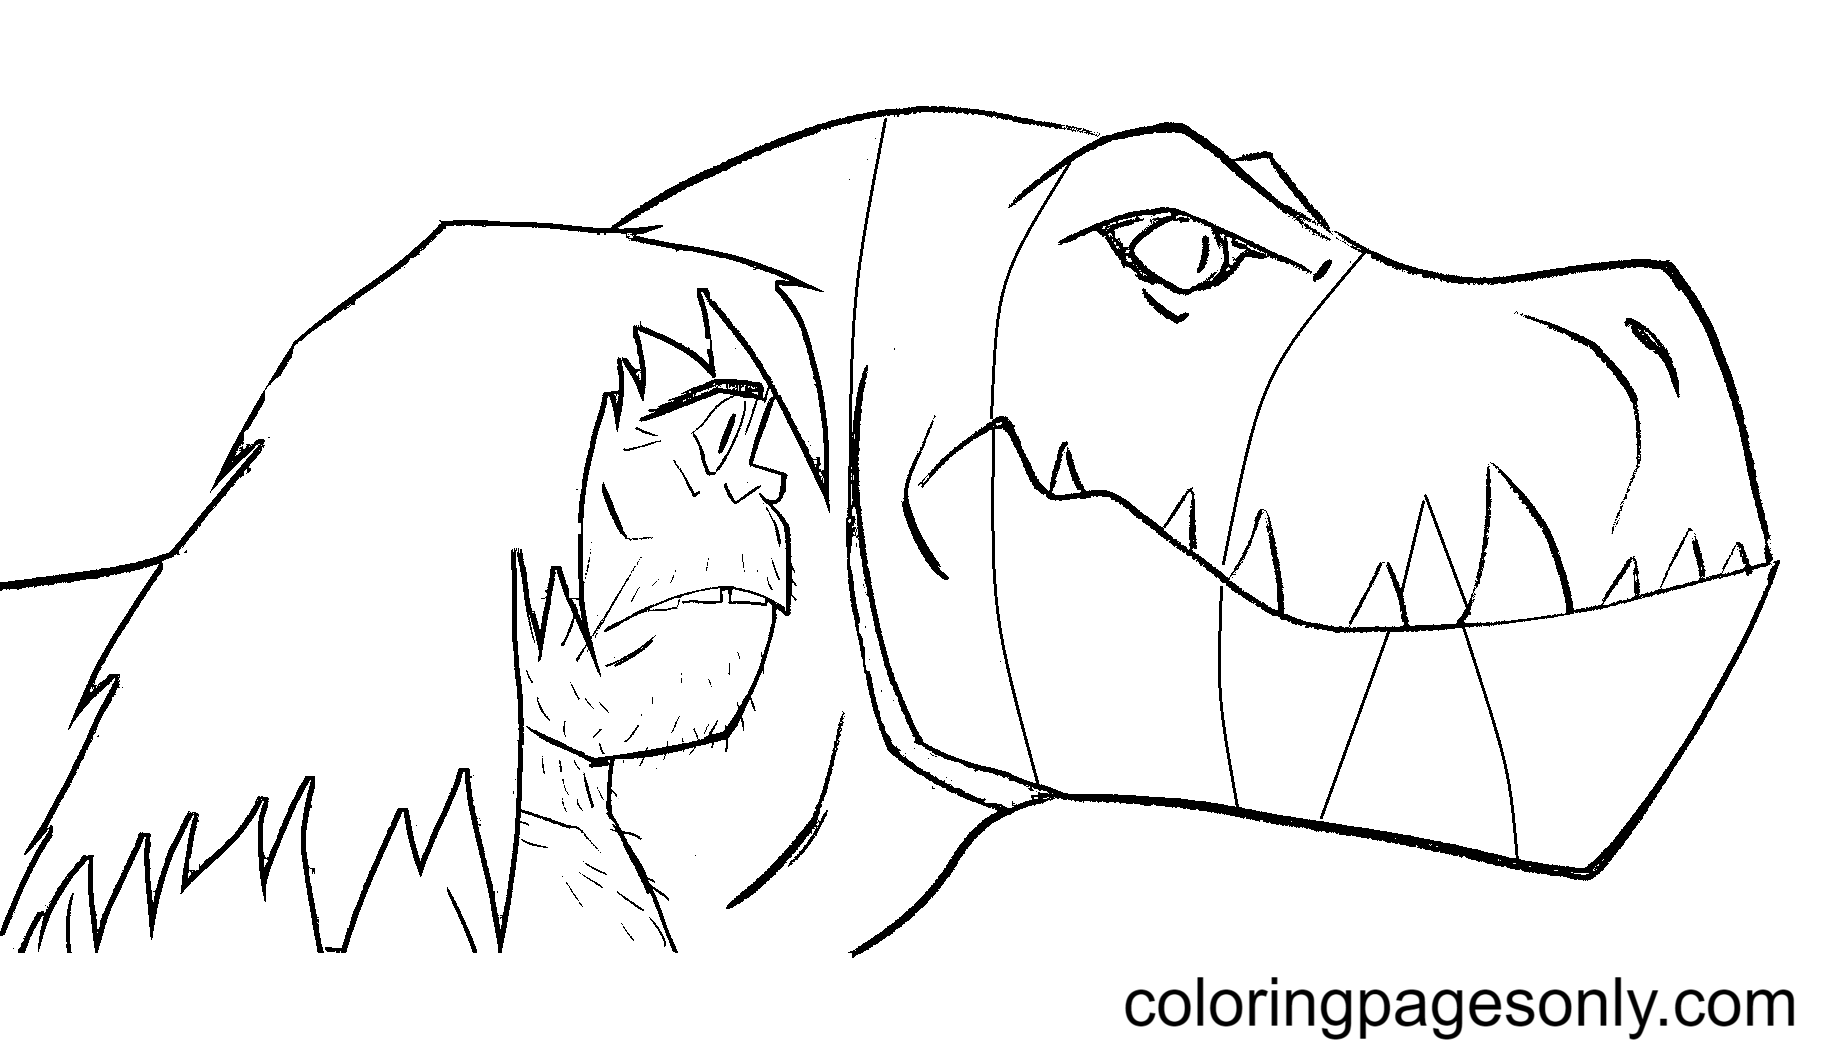 Primal – Spear with Fang Coloring Page